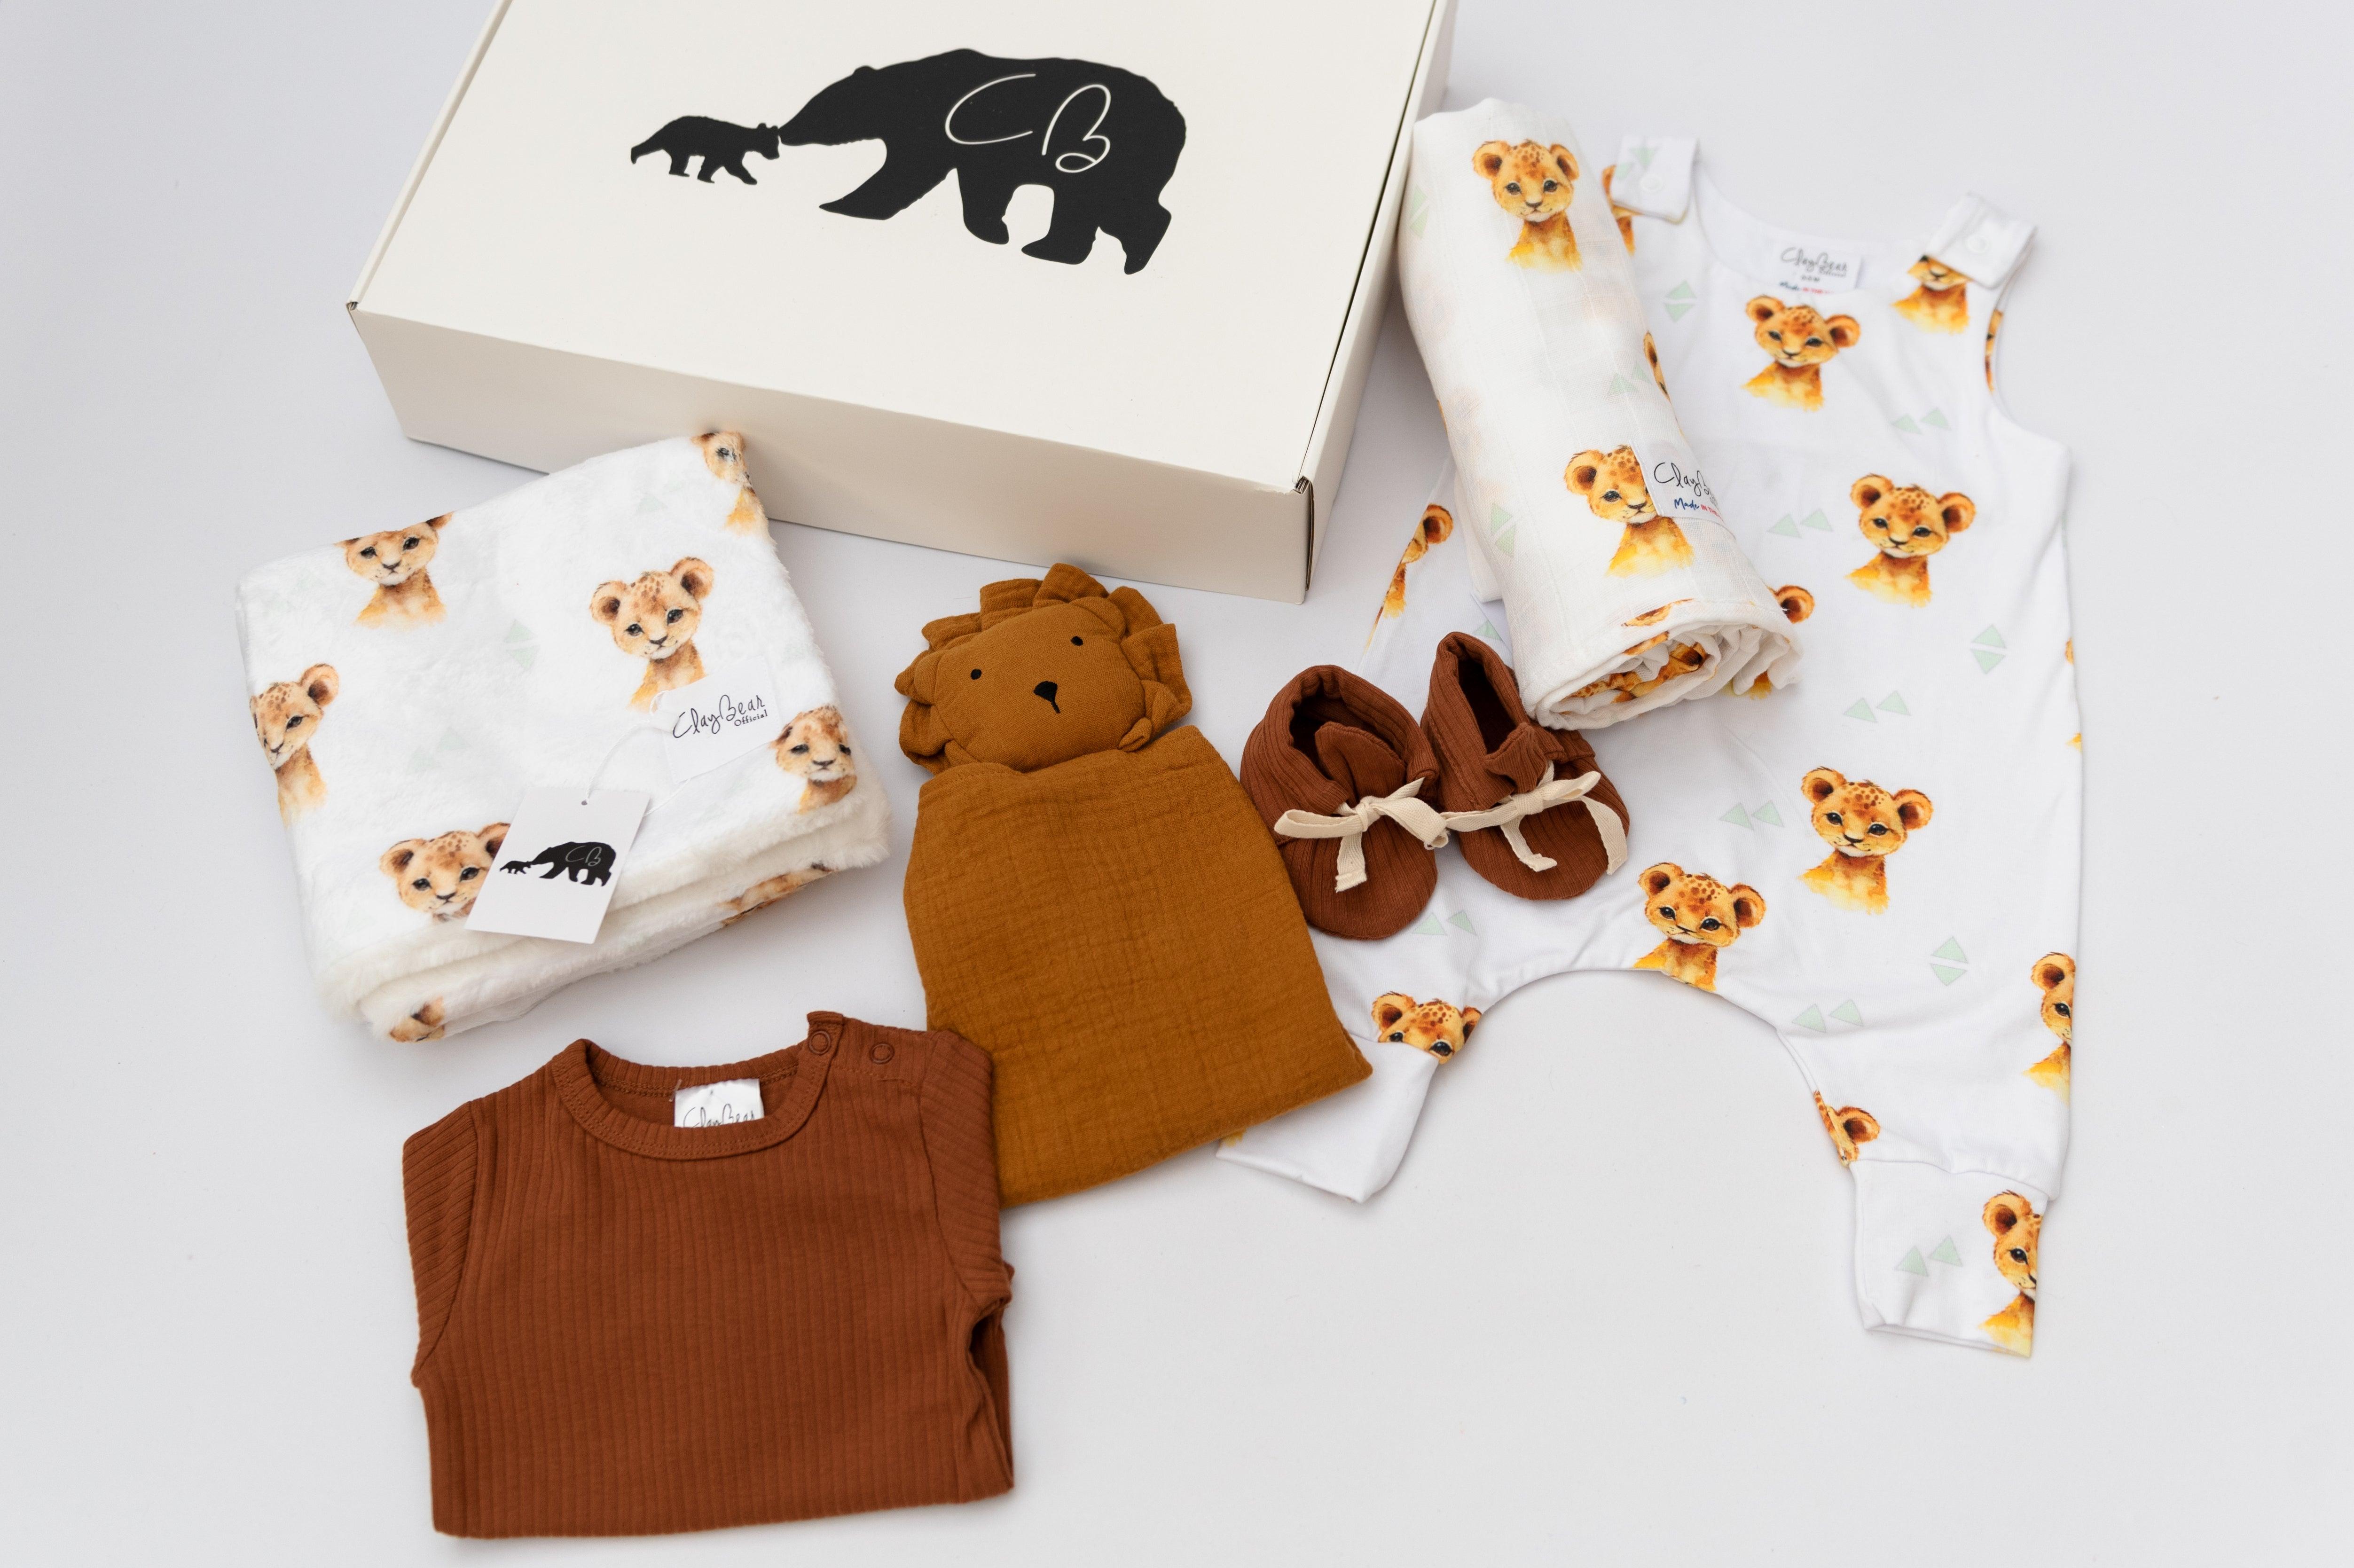 files/new-baby-gift-box-lion-cub-claybearofficial-10.jpg